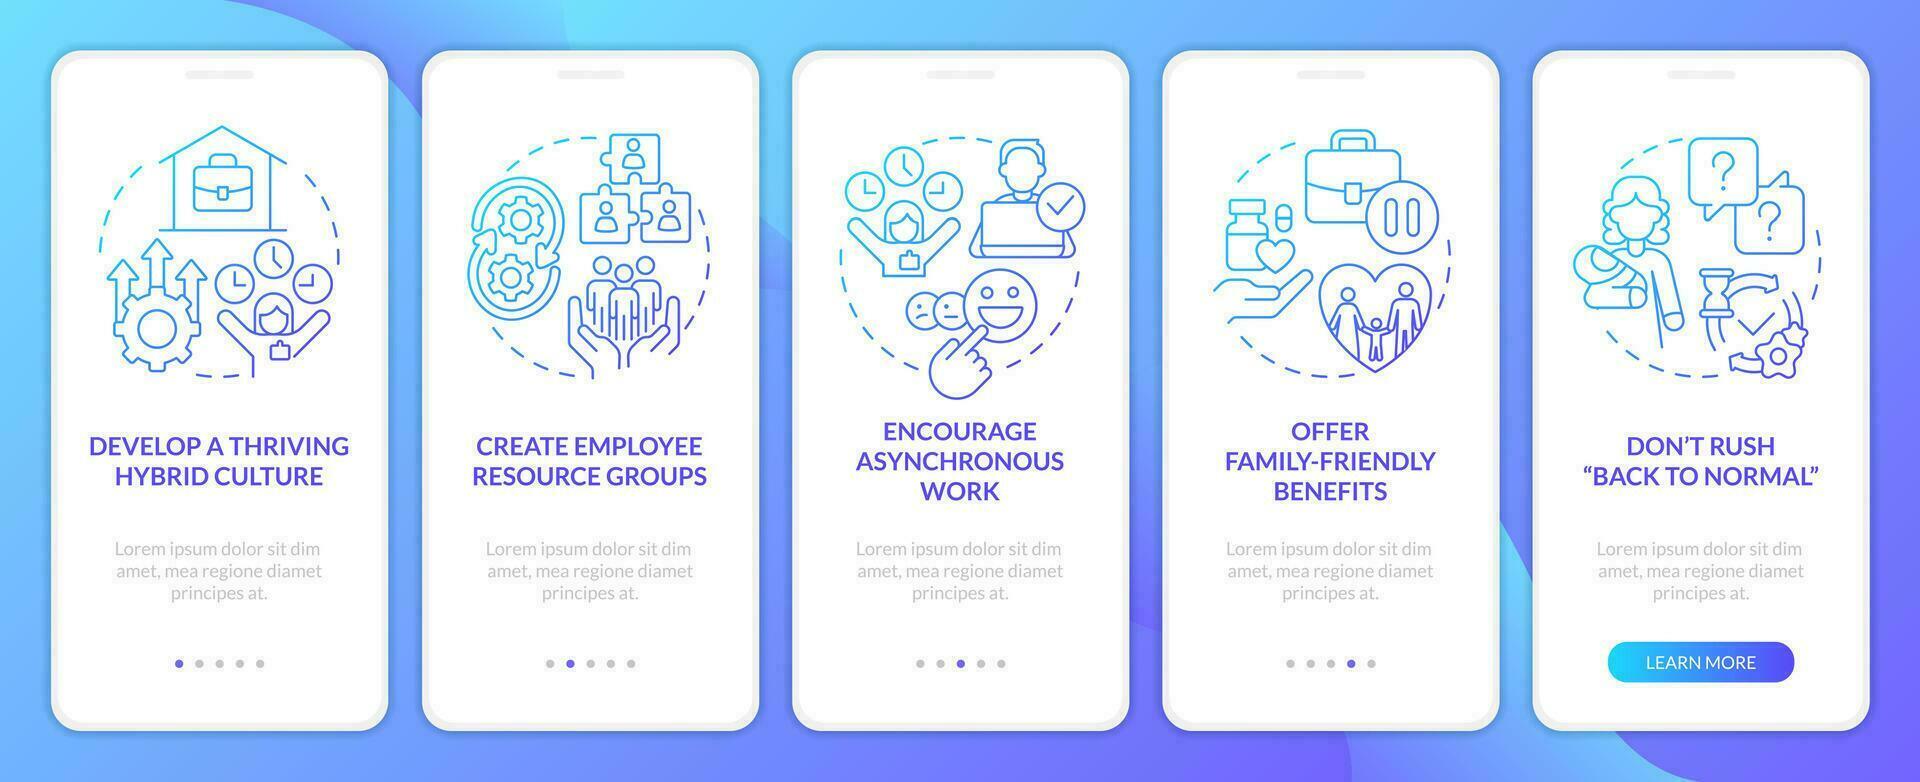 Family-oriented company blue gradient onboarding mobile app screen. Walkthrough 5 steps graphic instructions with linear concepts. UI, UX, GUI template vector